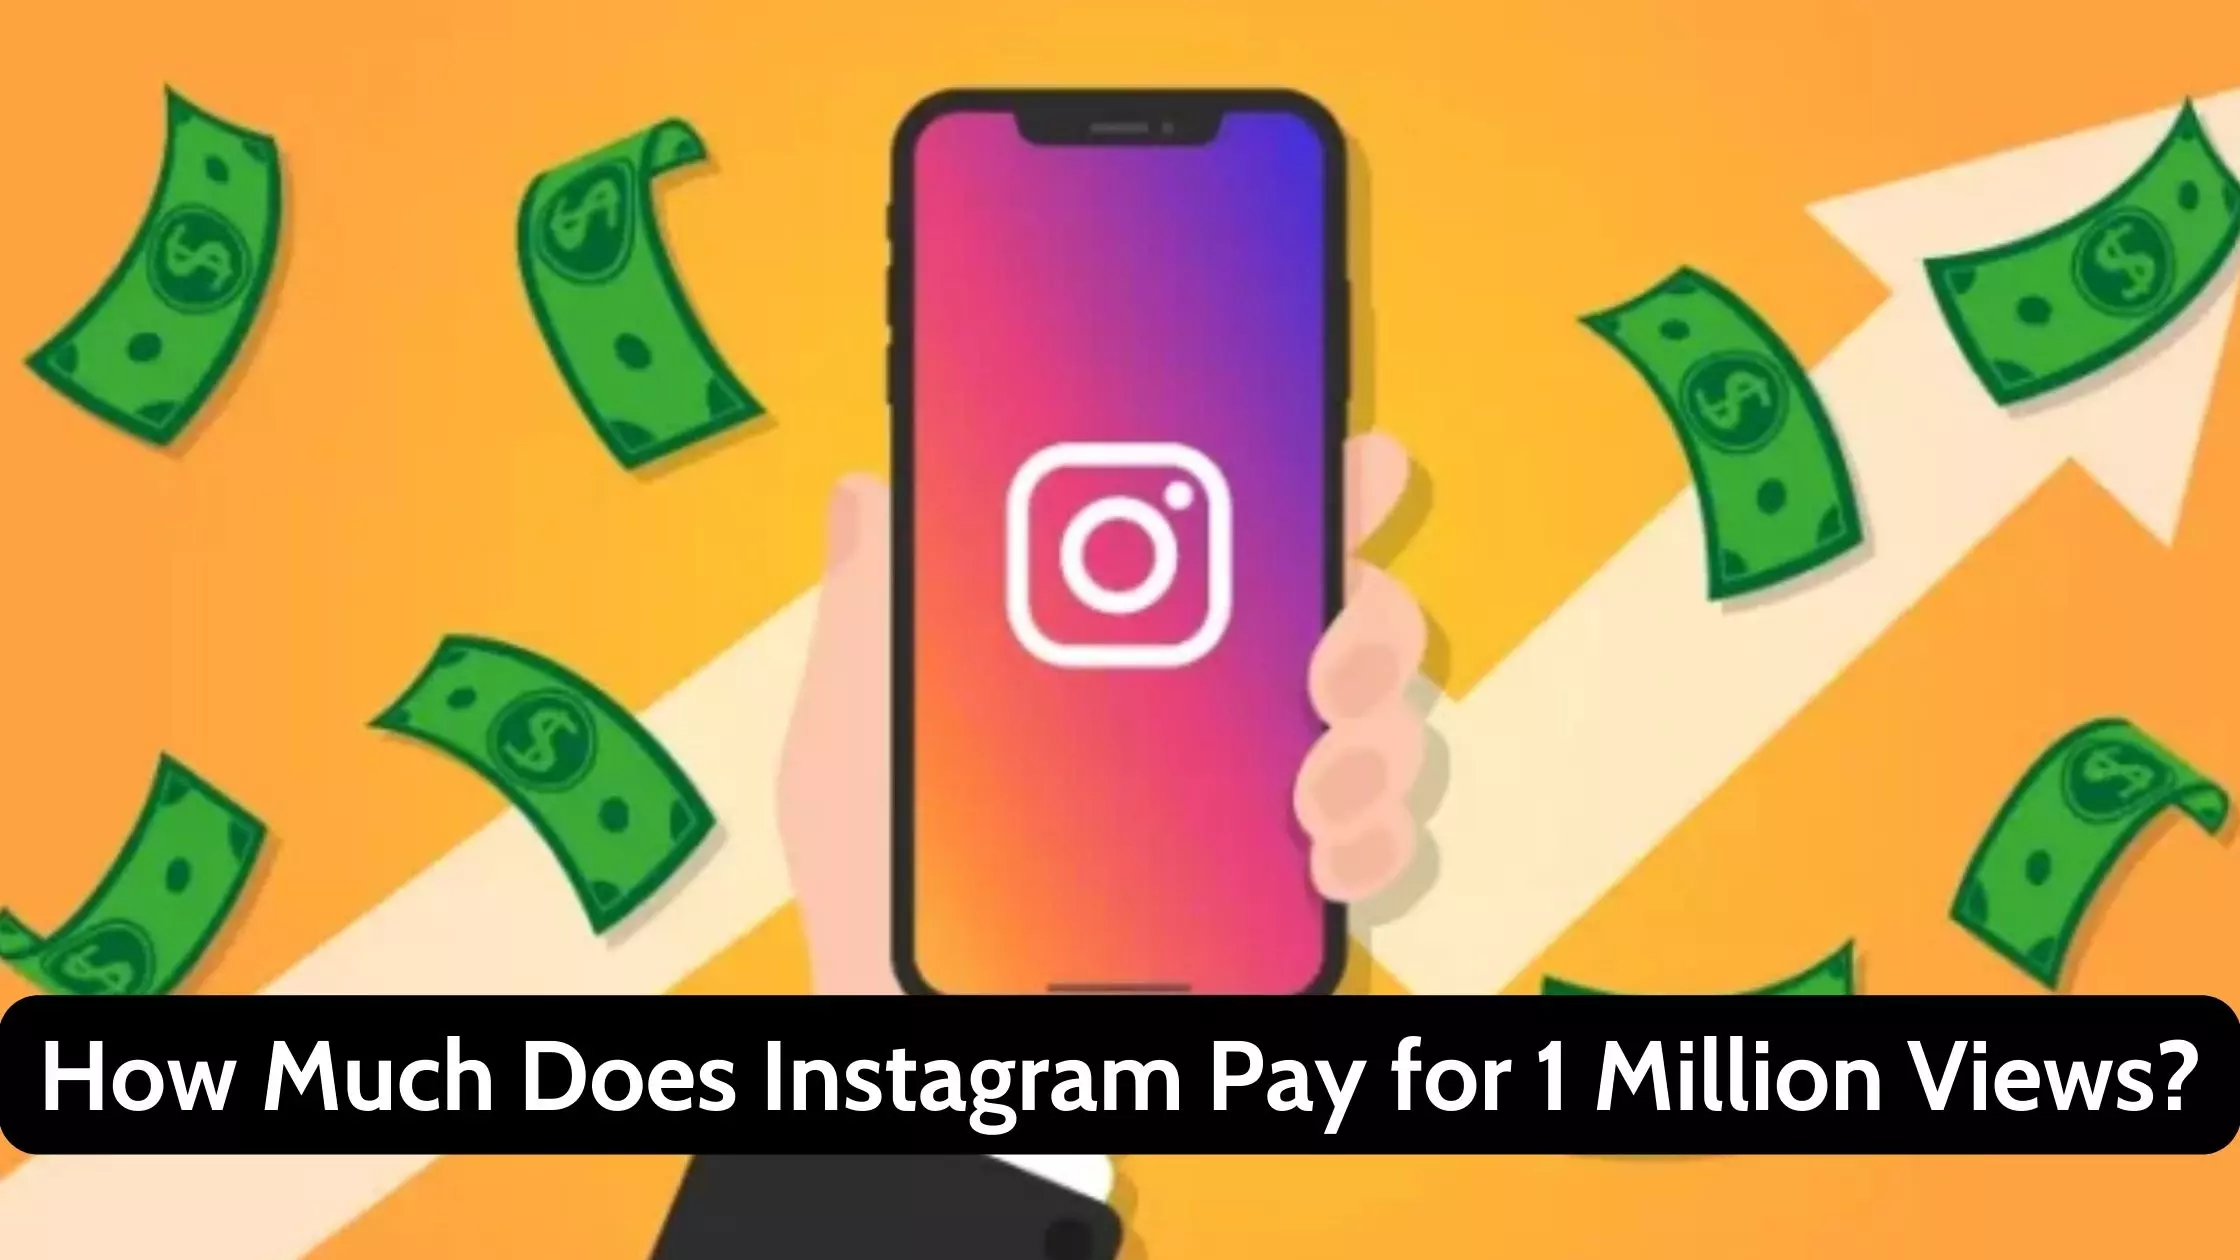 How Much does Instagram Pay for 1 Million Views